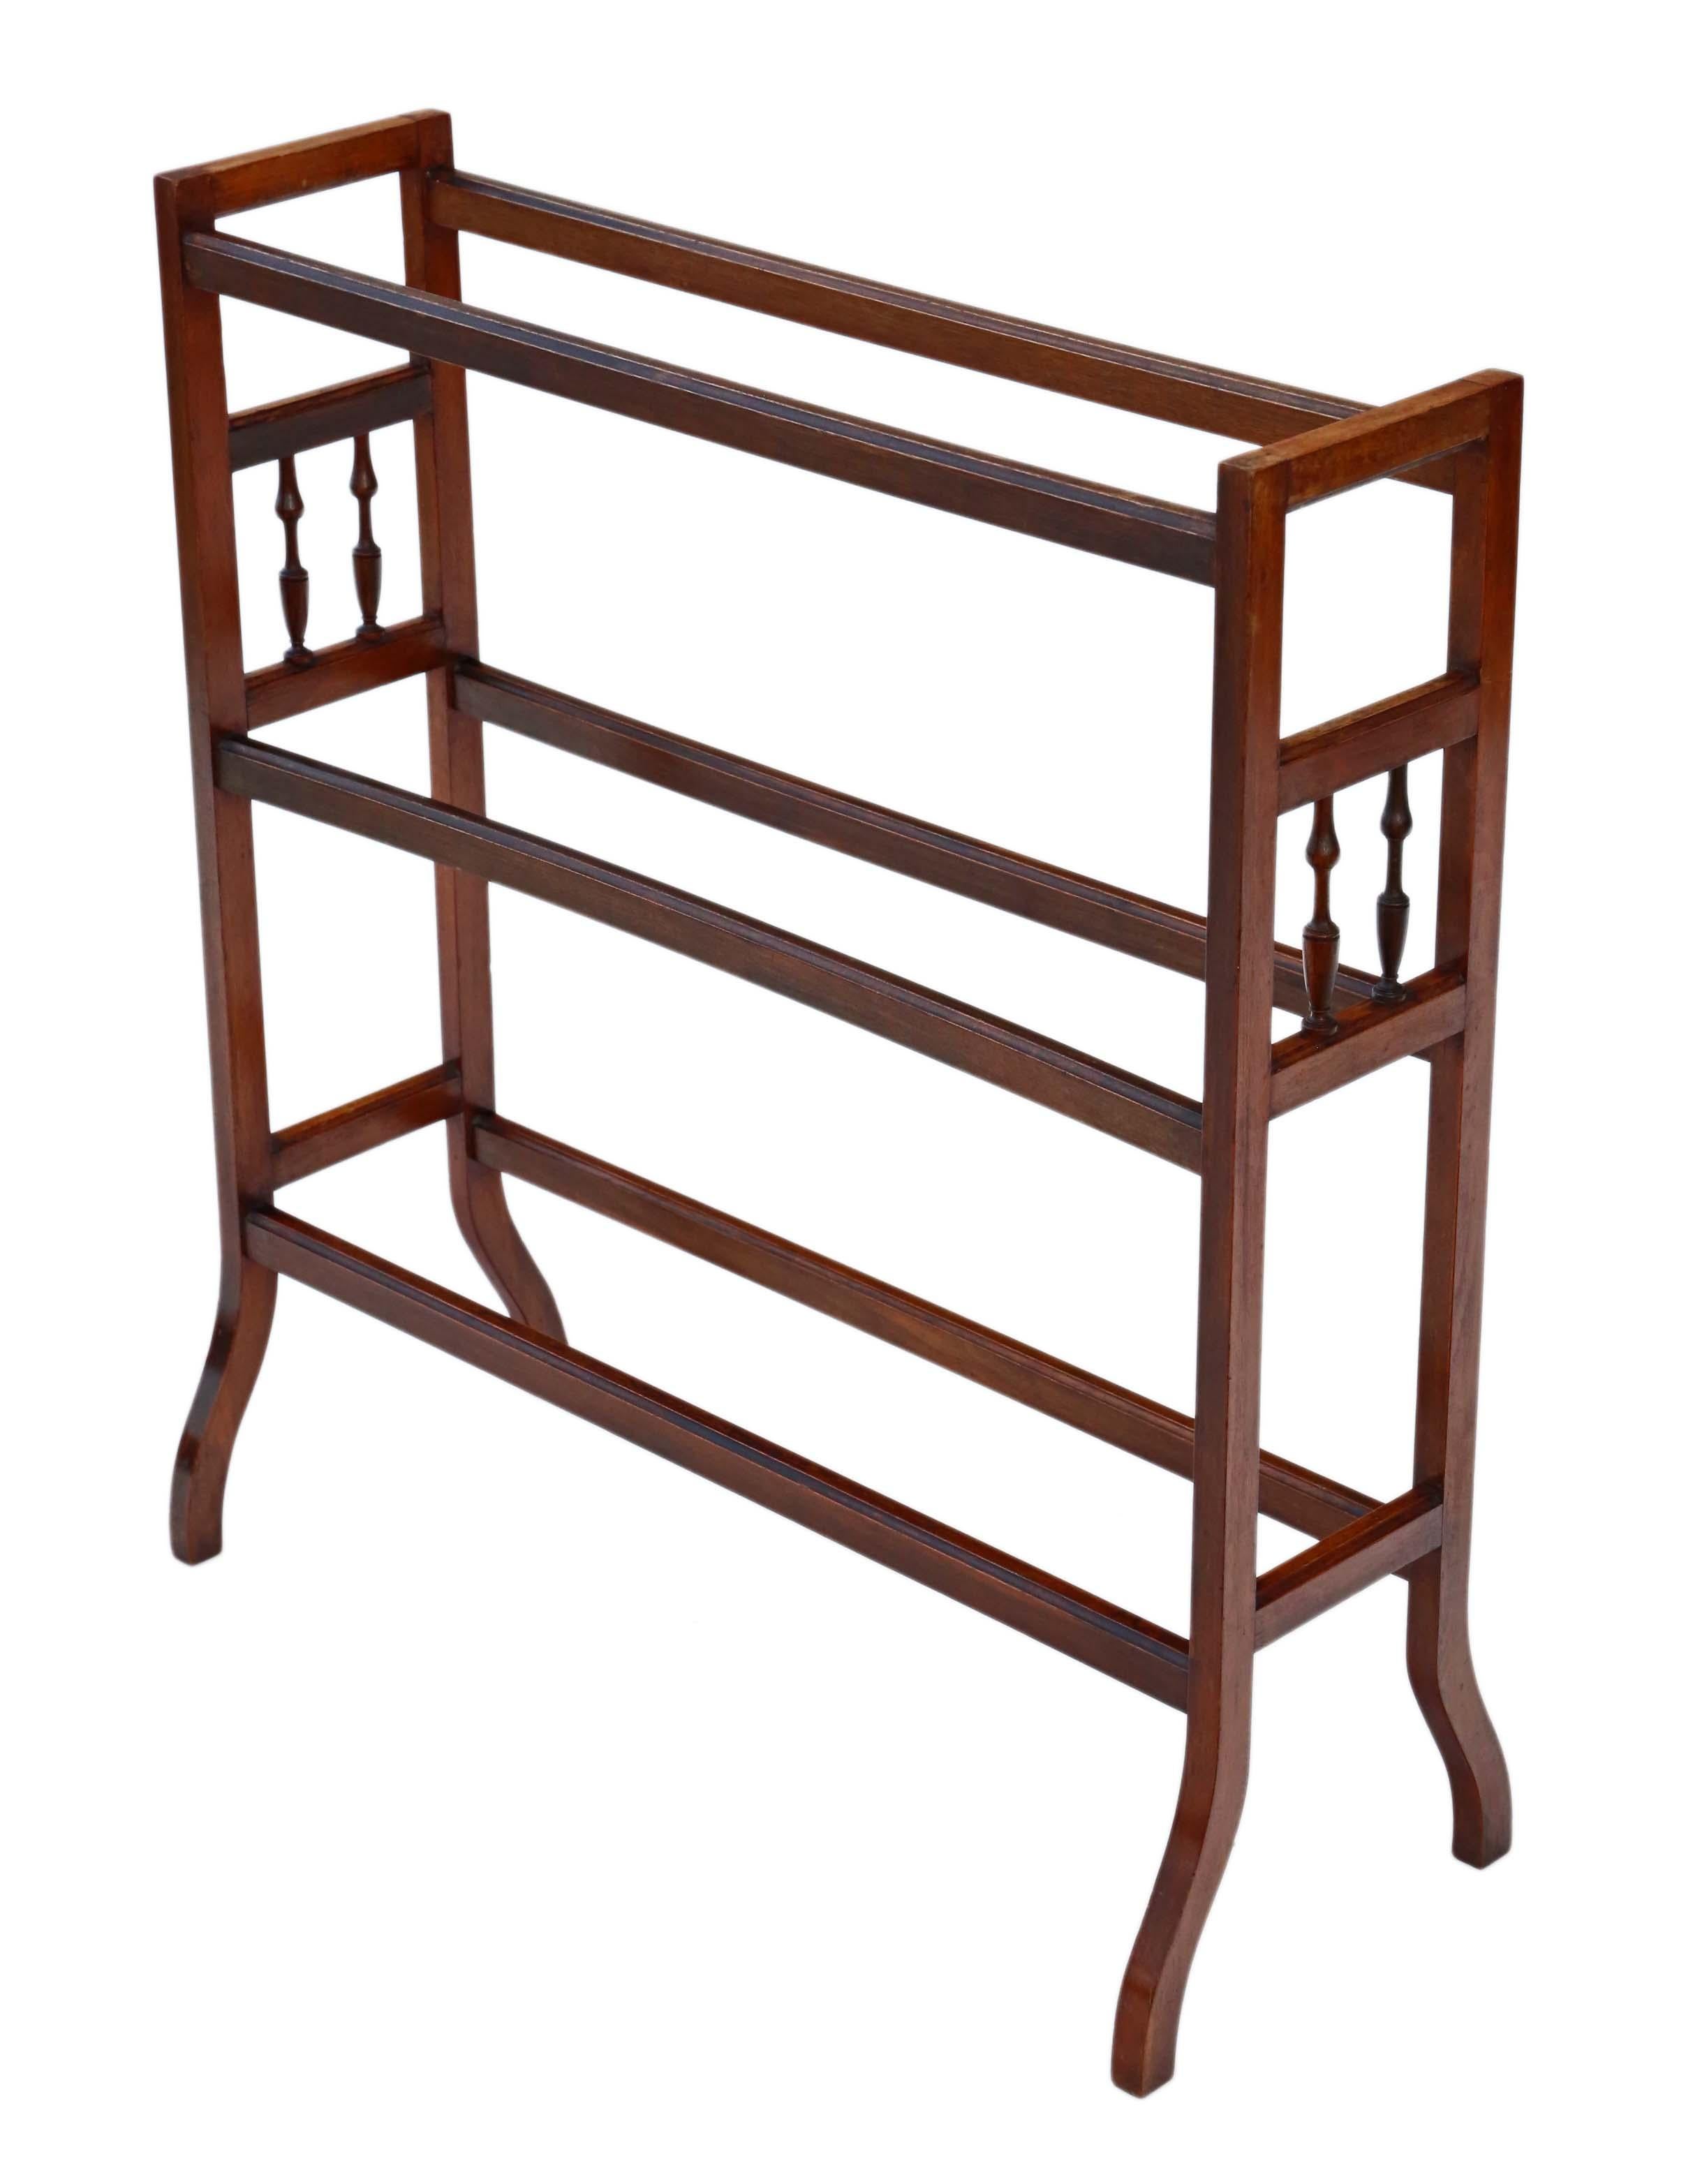 Antique quality Victorian circa 1880 mahogany towel rail stand.
This item is solid and strong, with no loose joints.
No woodworm.
Would look amazing in the right location!
Overall maximum dimensions:
81cm W x 32cm D x 87cm H.
In very good